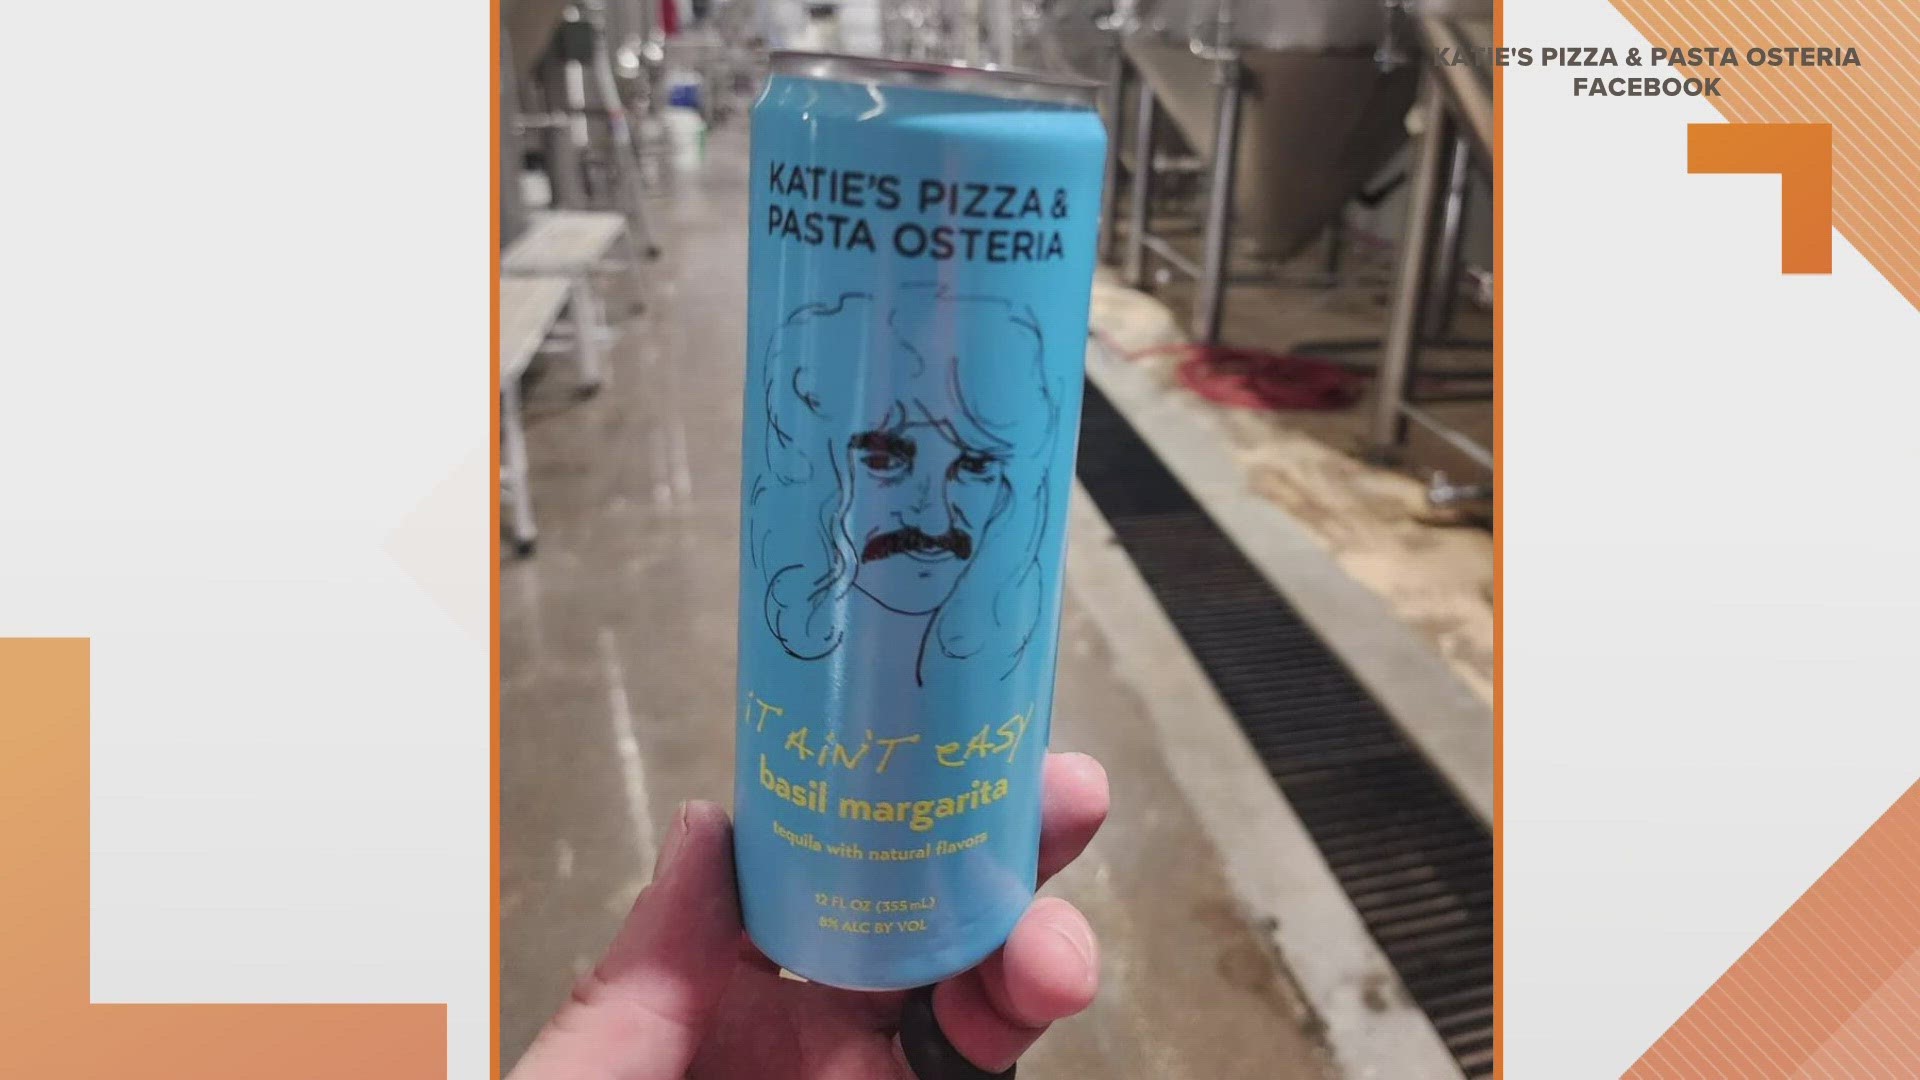 Canning starts Tuesday for Katie's Pizza & Pasta Osteria's "It ain't easy" basil margarita. It's not clear when the margaritas will be avialable.